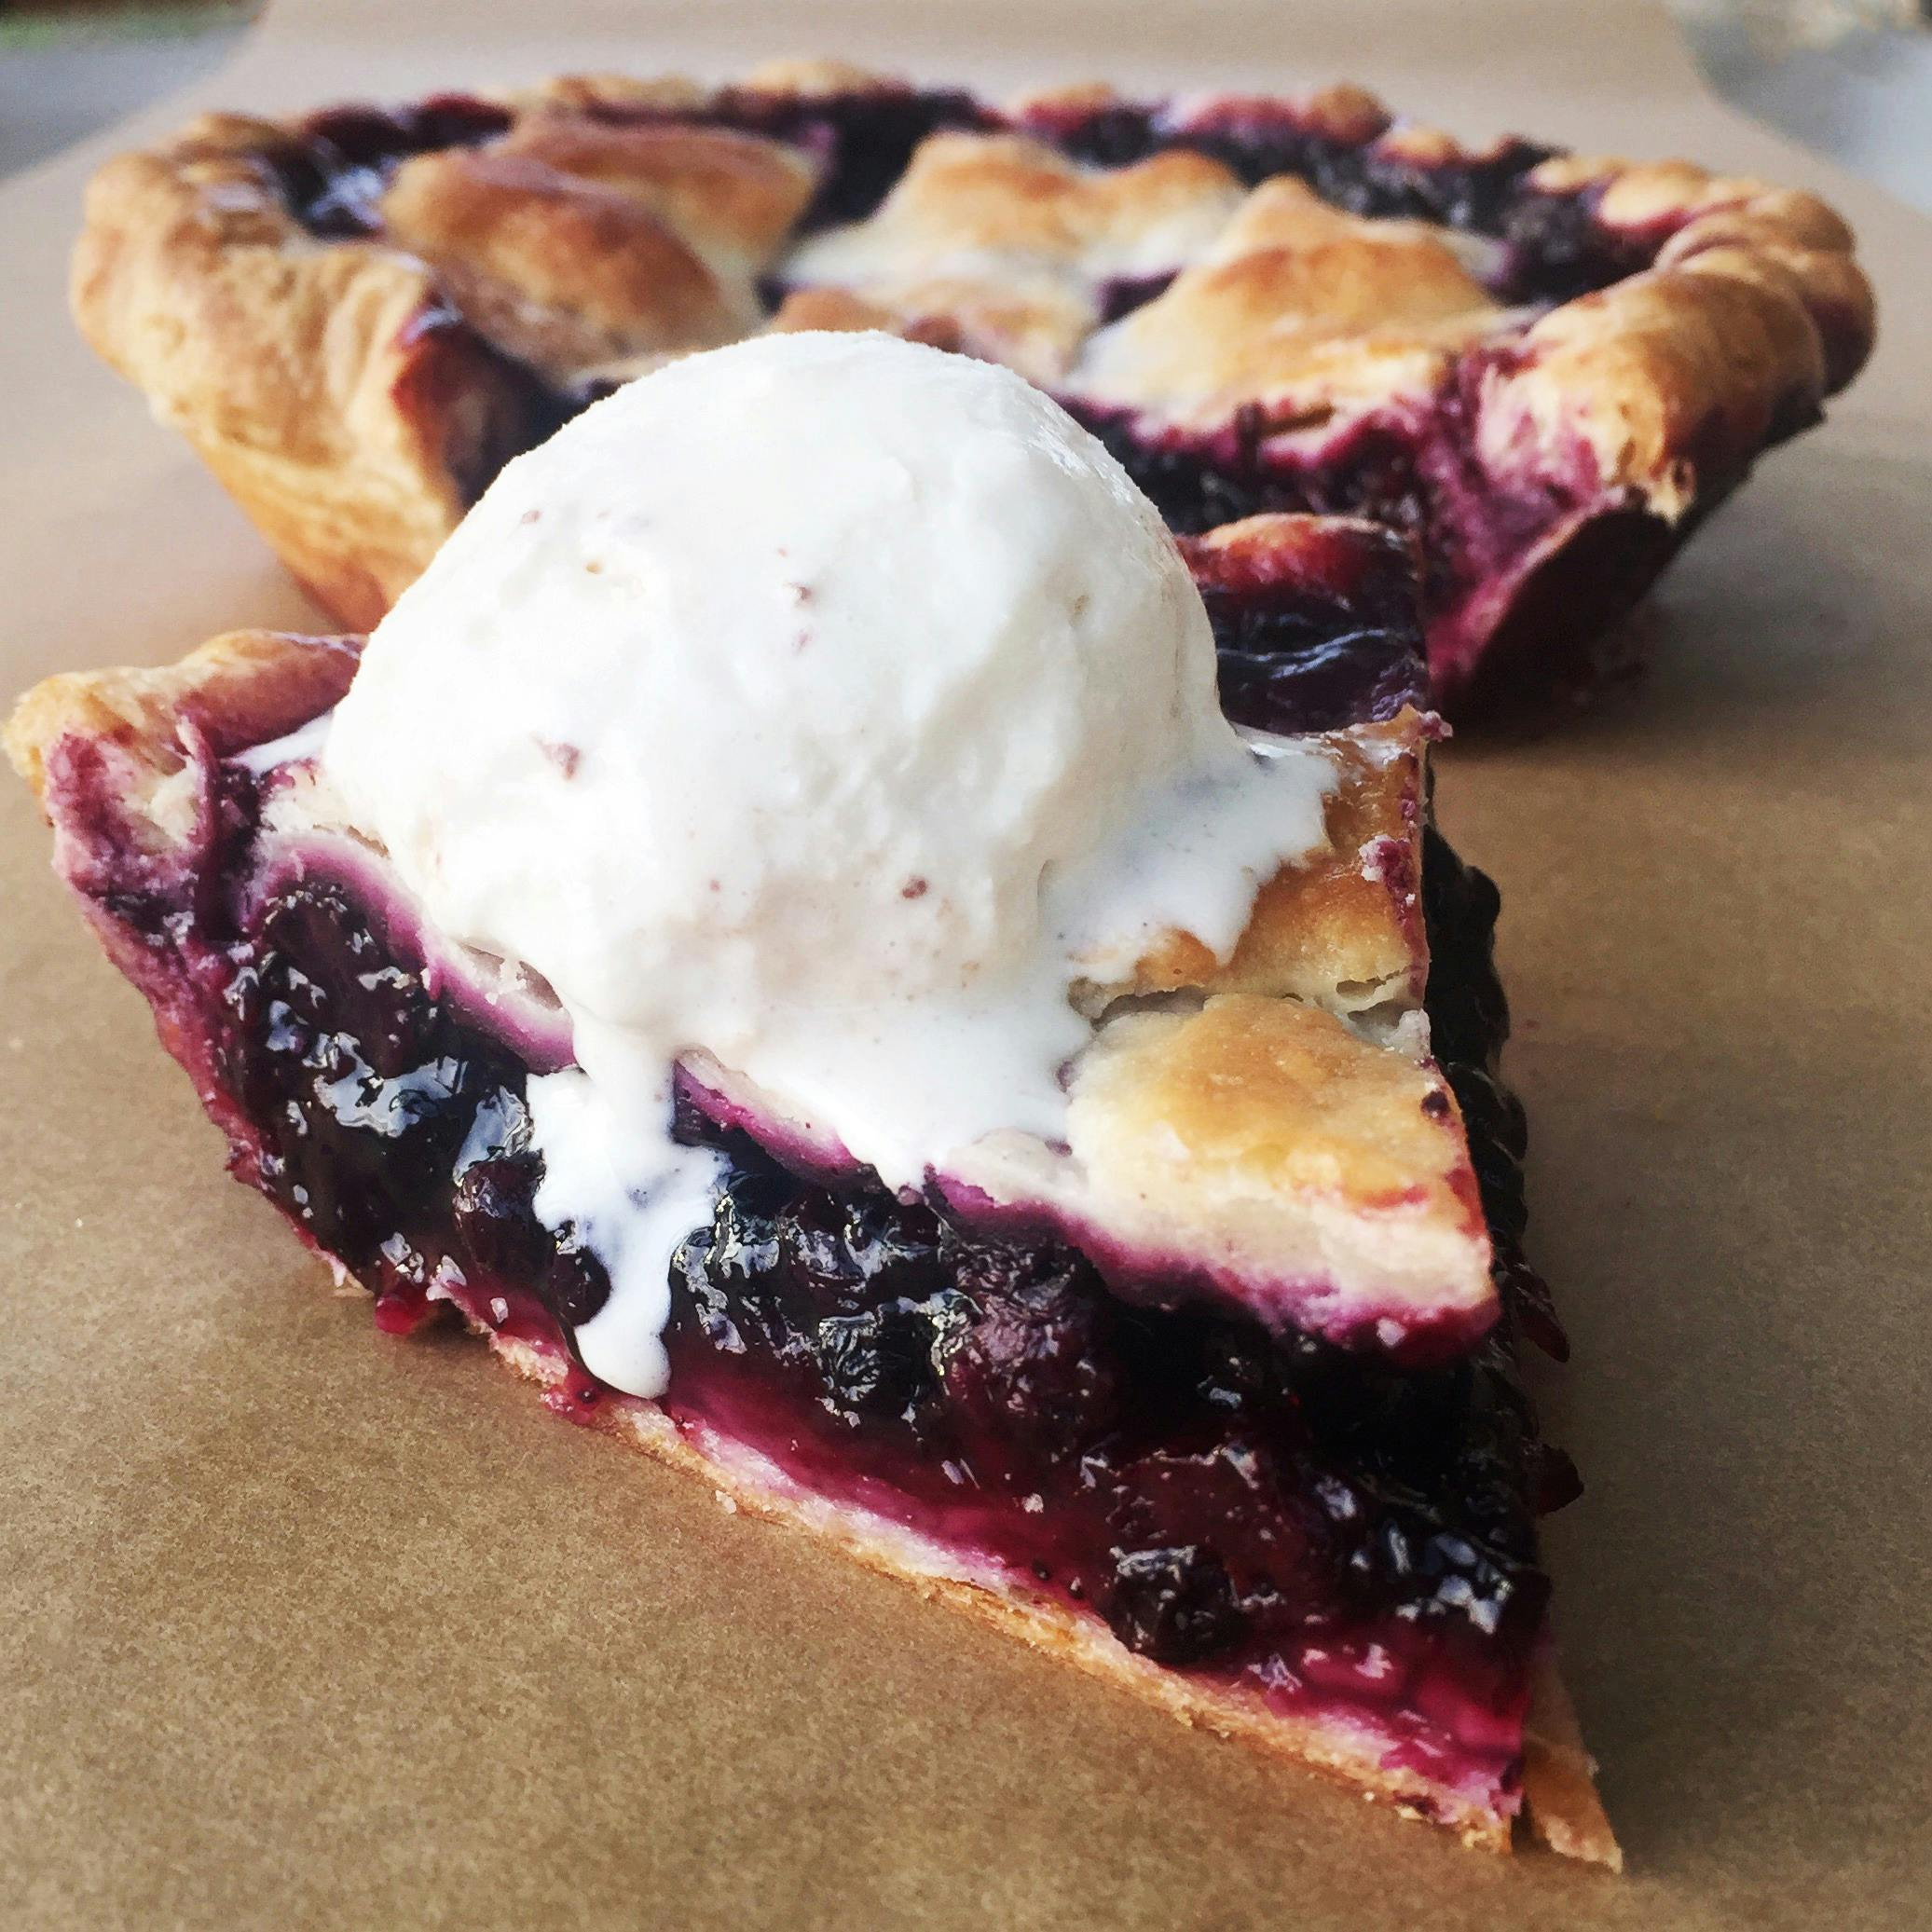 Maine Wild Blueberry Pie by Two Fat Cats Bakery - Goldbelly